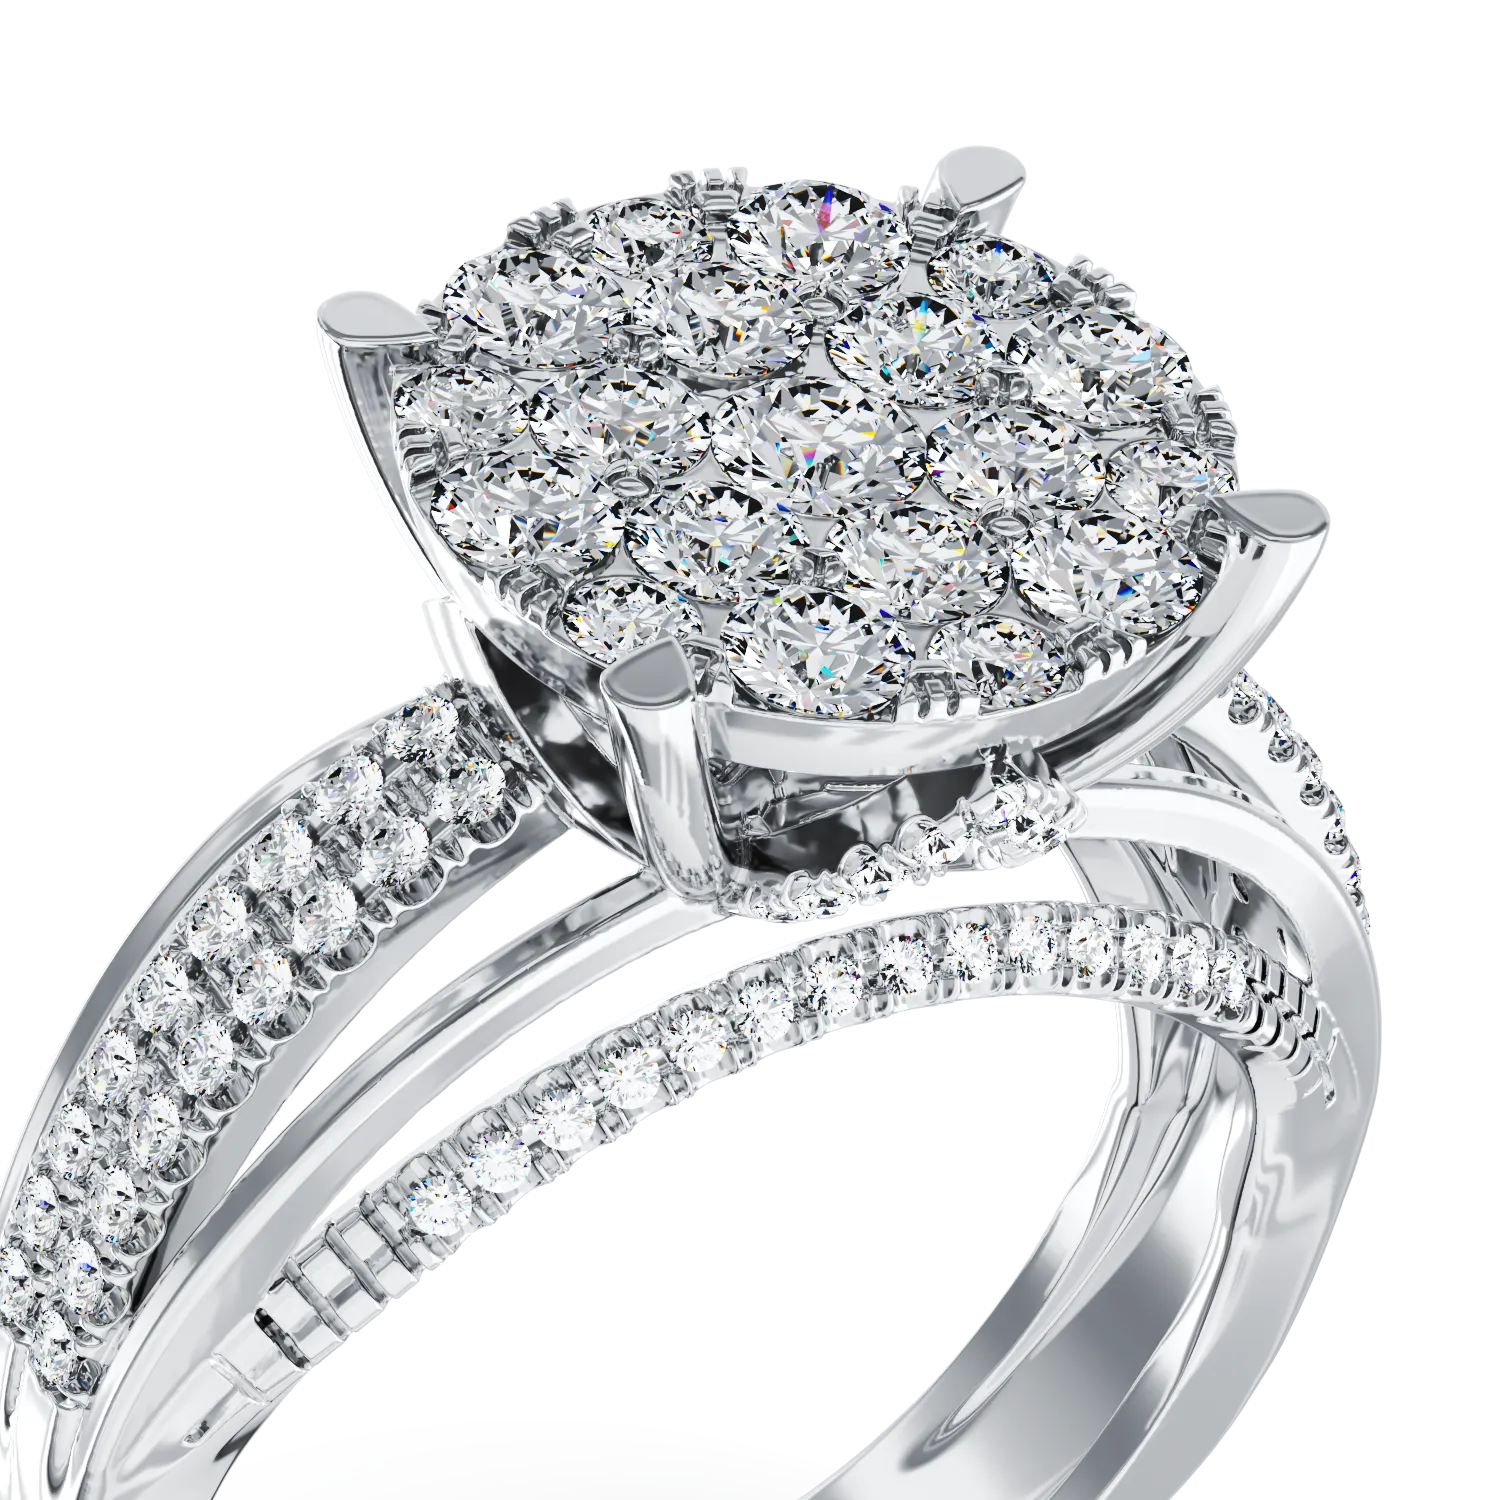 18K white gold engagement ring with 0.89ct diamonds